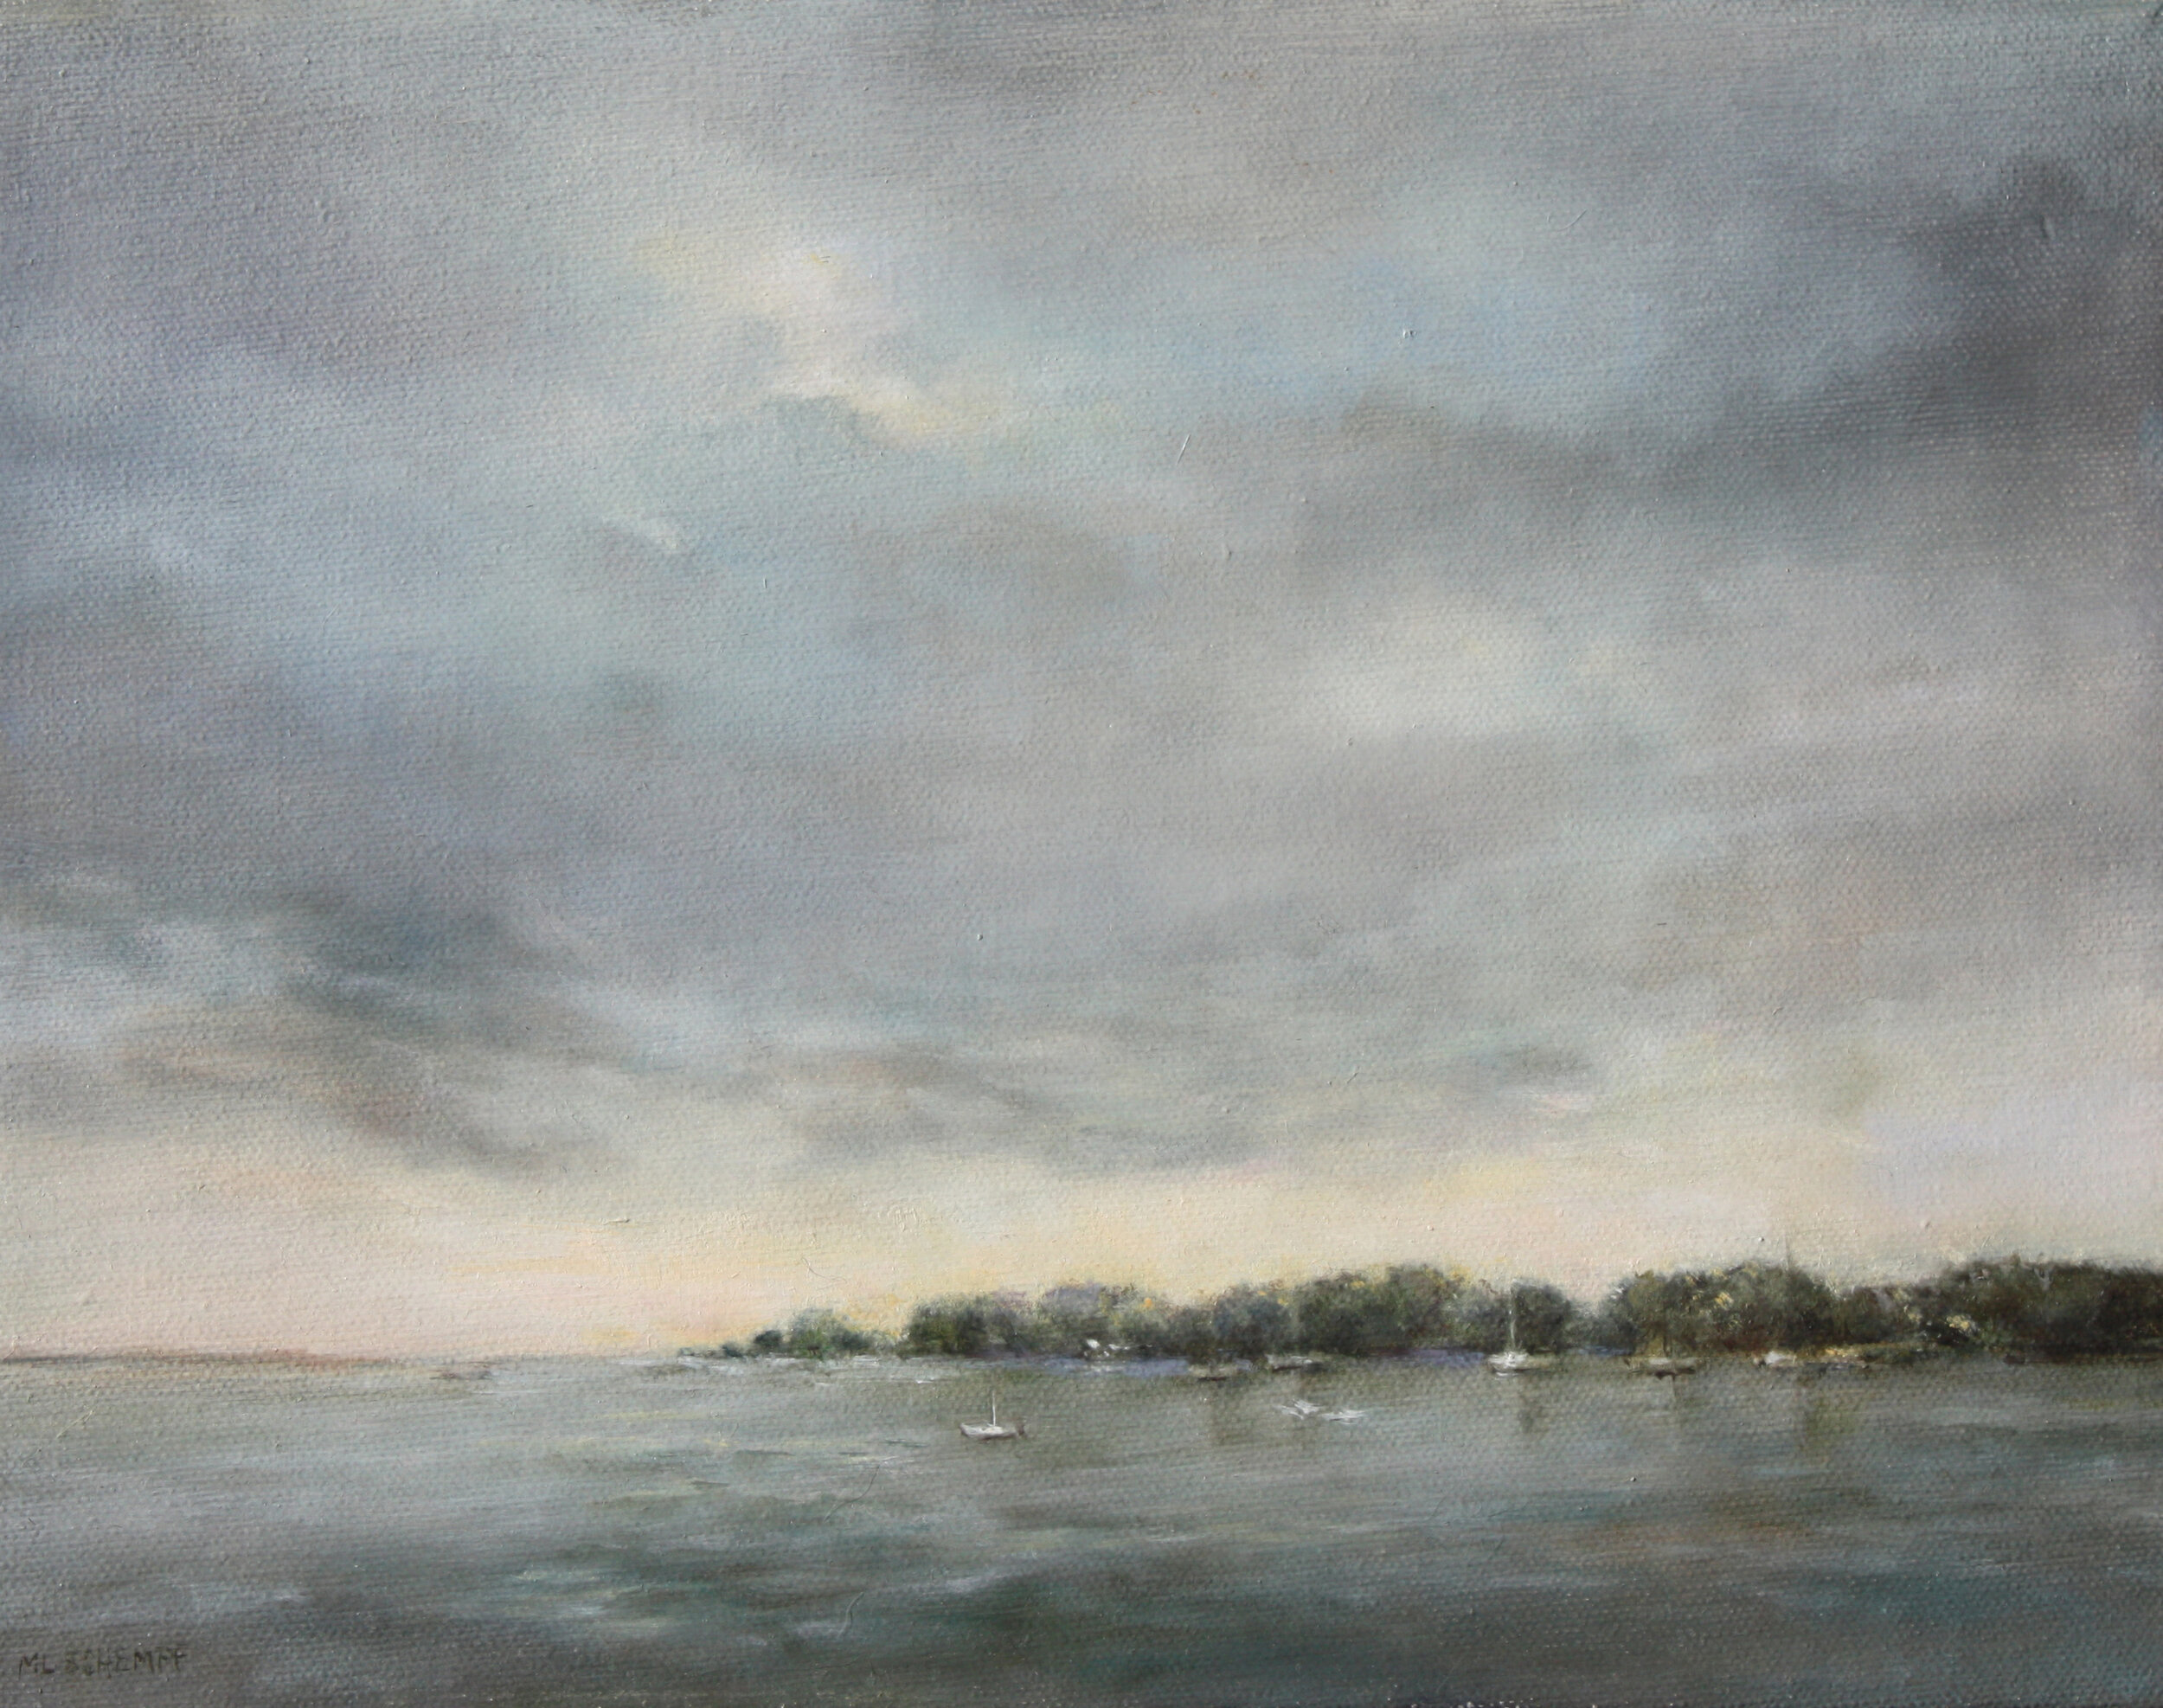  Mary Lou Schempf  Cloud Over Stonington,  11’ x 14”, oil on linen  (private collection)   